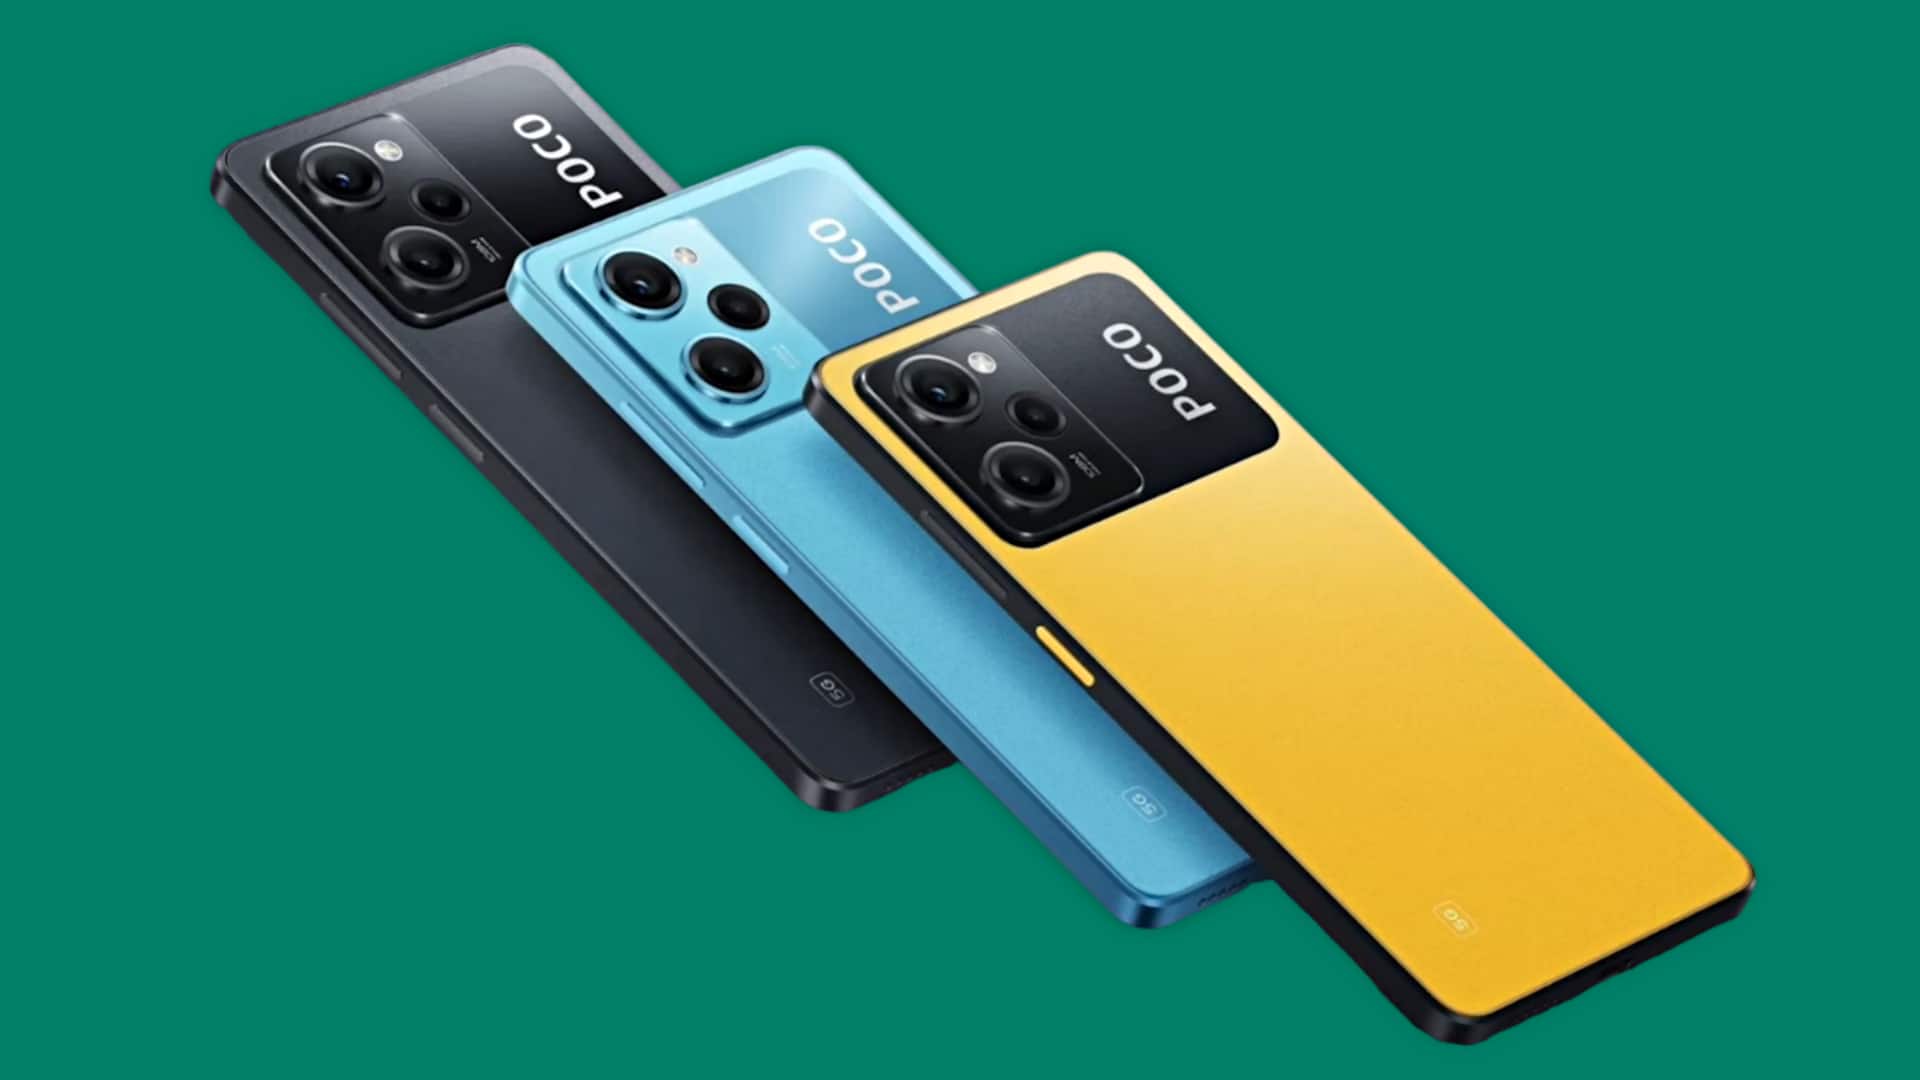 POCO X5 Pro 5G launched in India at Rs. 23,000